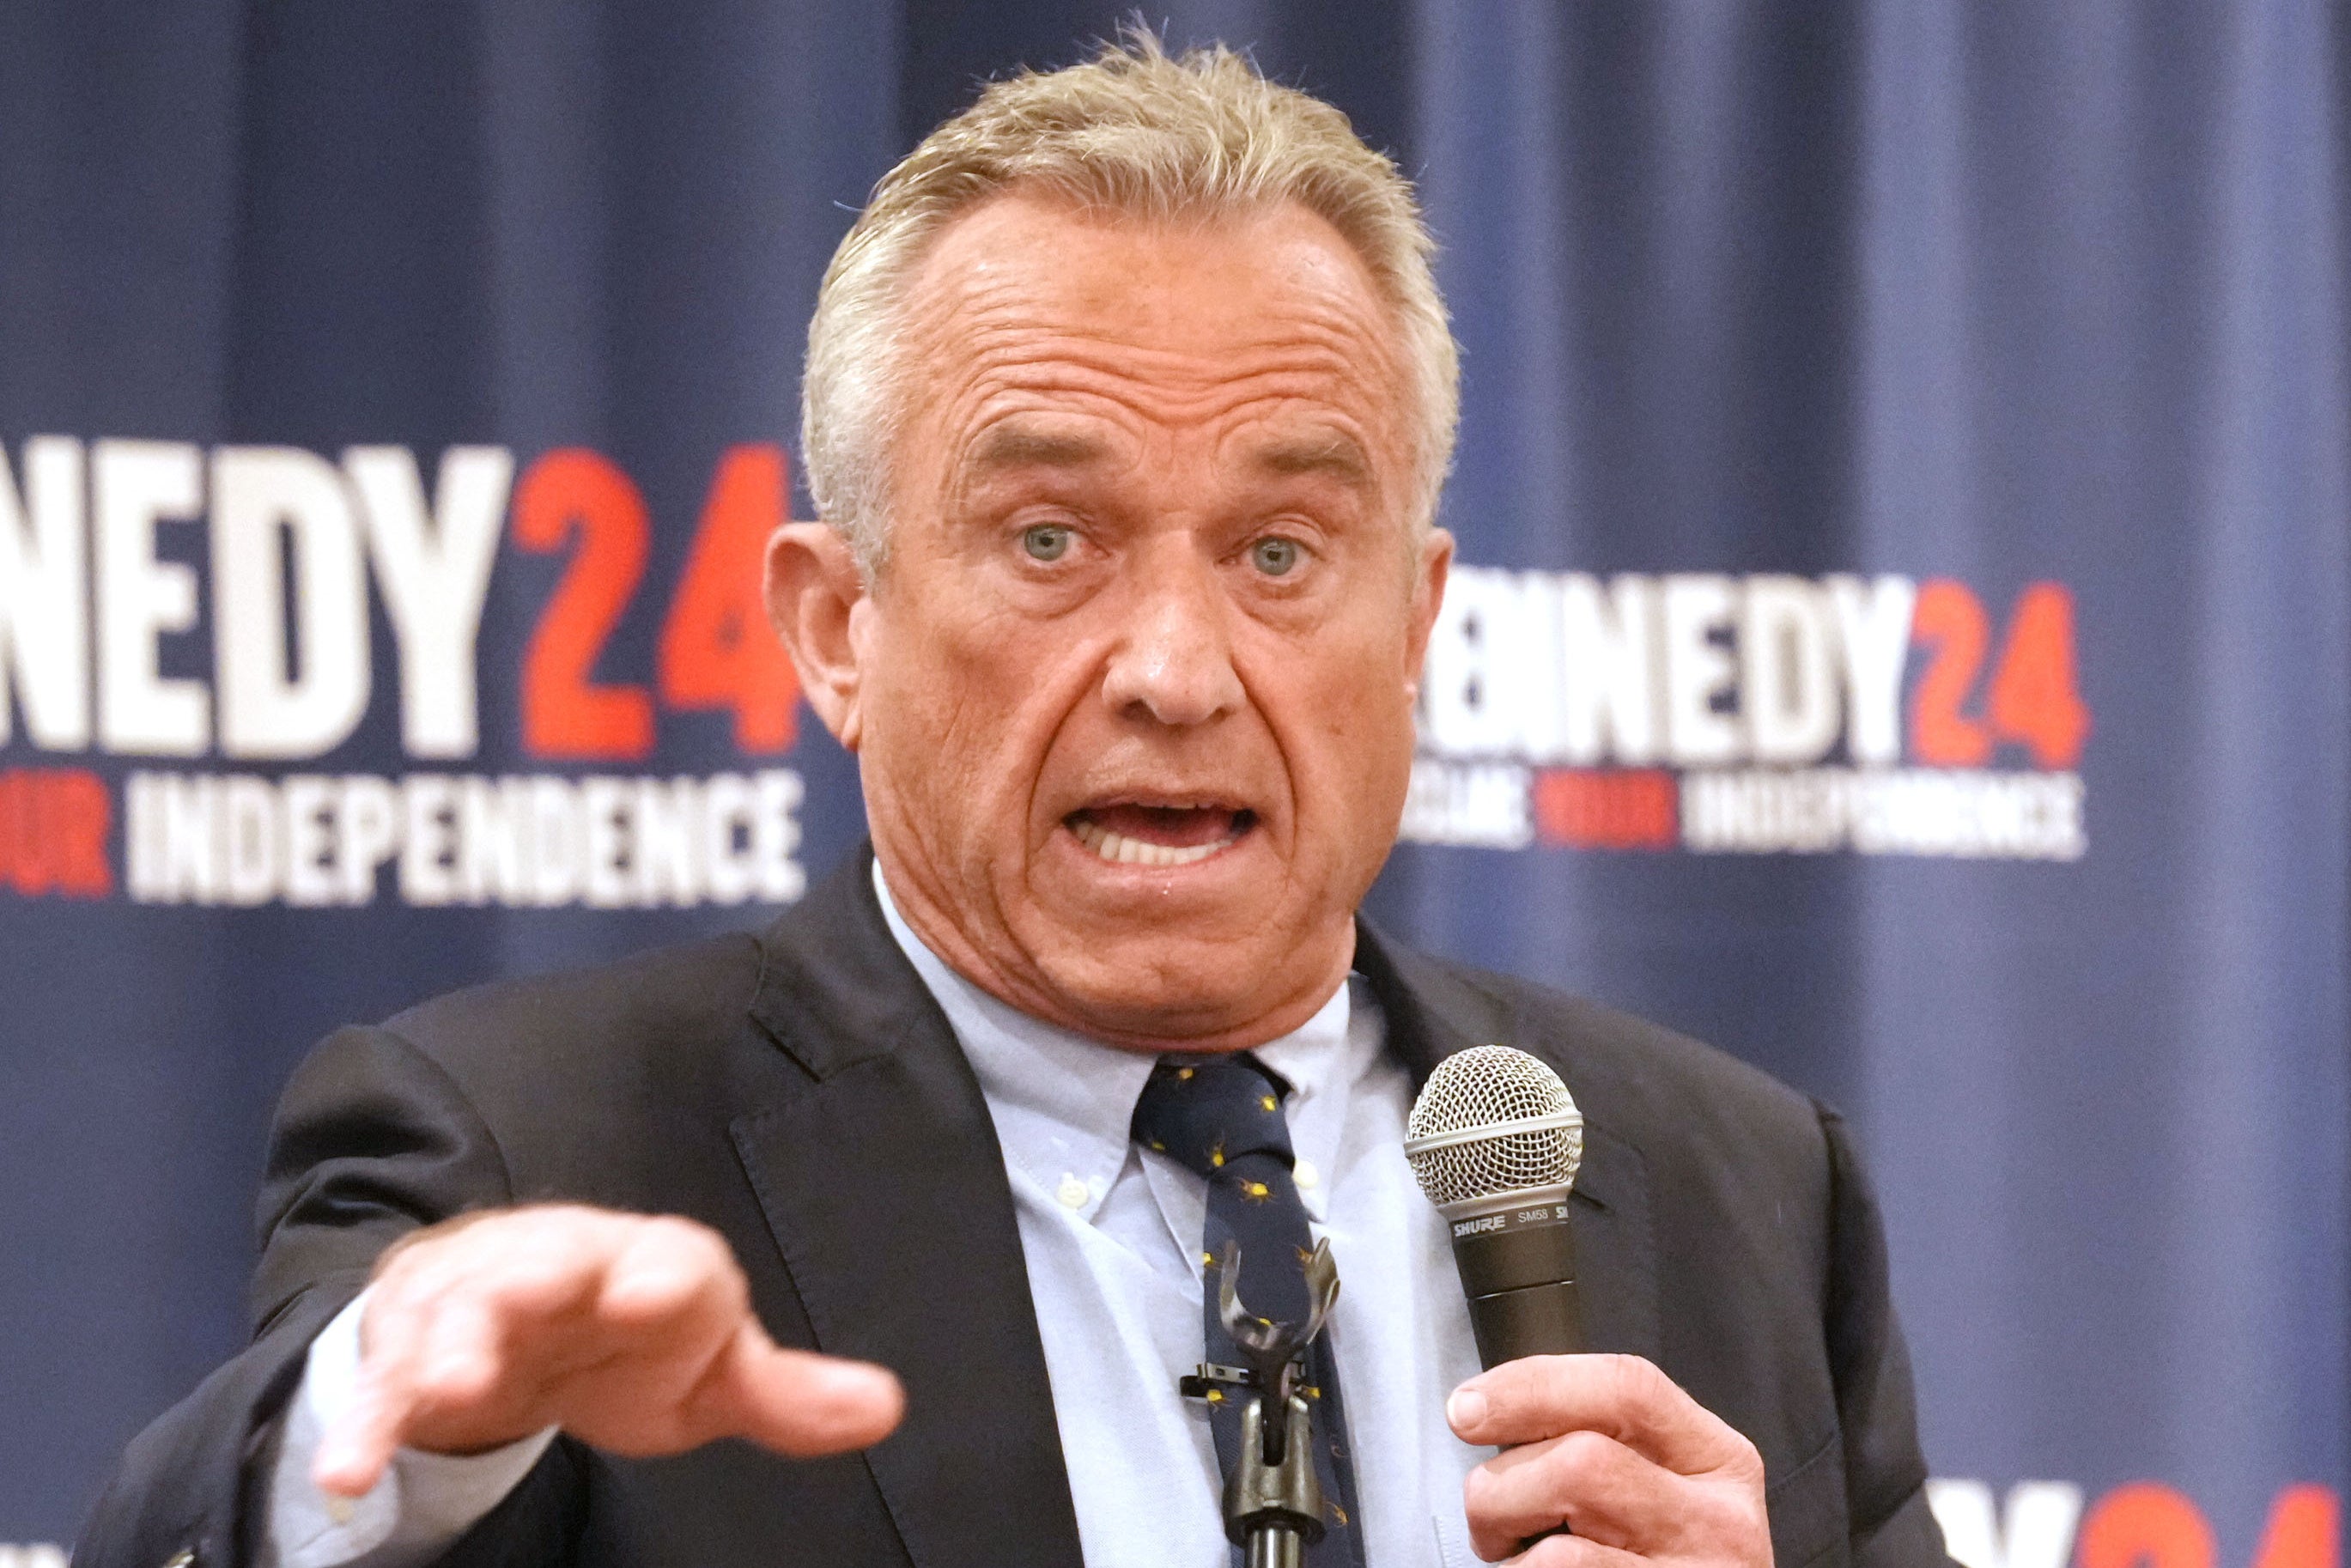 Robert F Kennedy Jr says the Trump campaign did tap him for the ticket